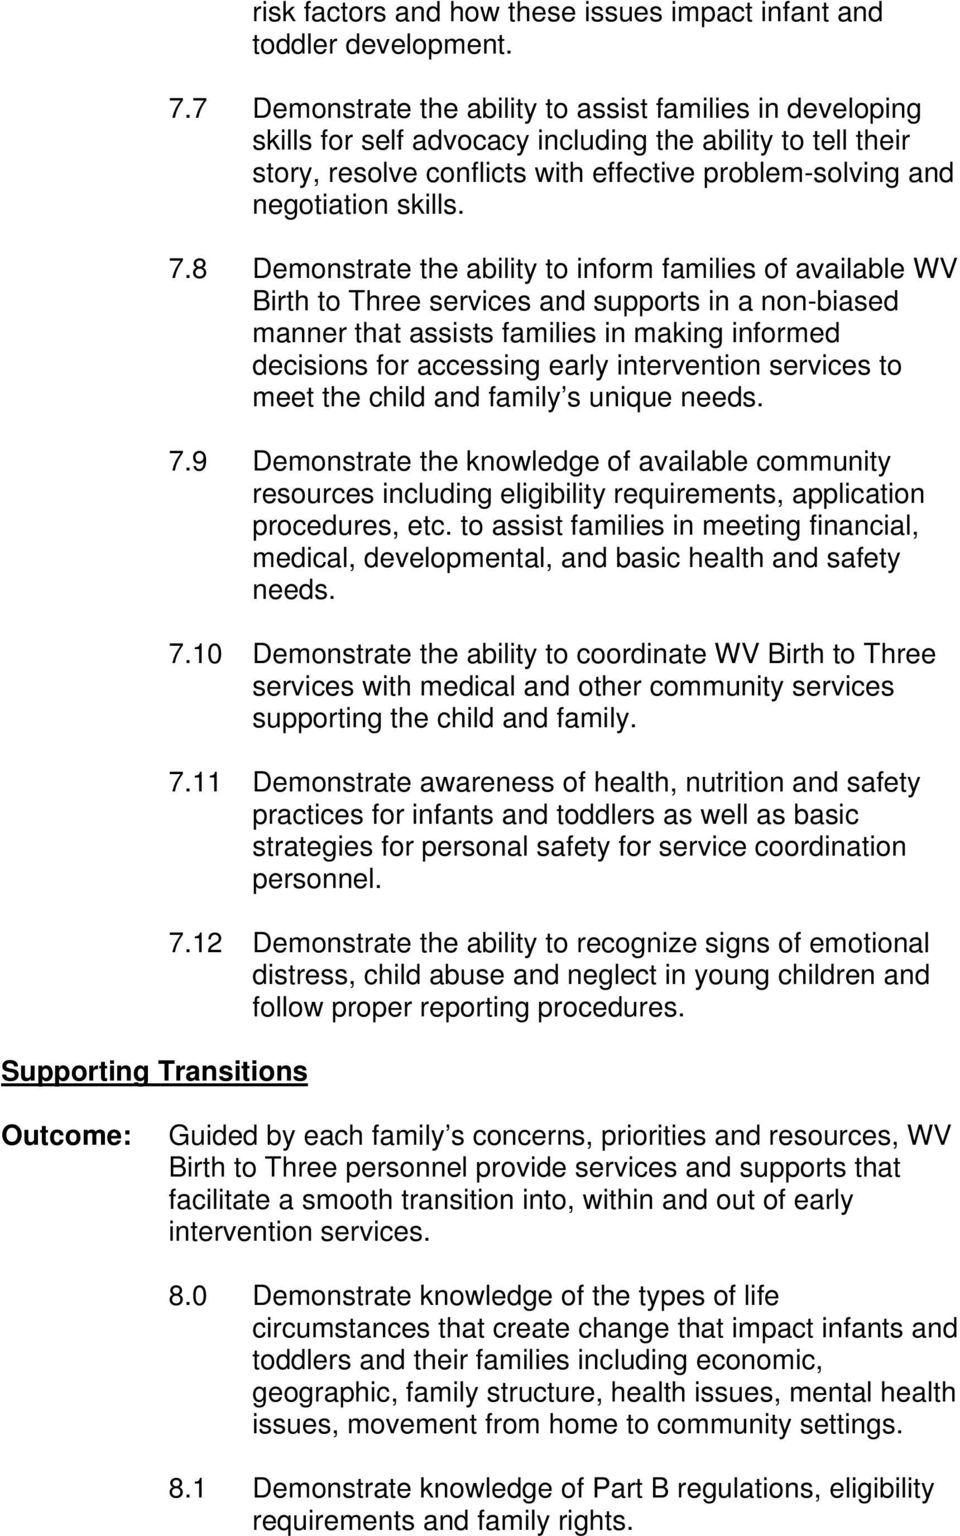 7.8 Demonstrate the ability to inform families of available WV Birth to Three services and supports in a non-biased manner that assists families in making informed decisions for accessing early